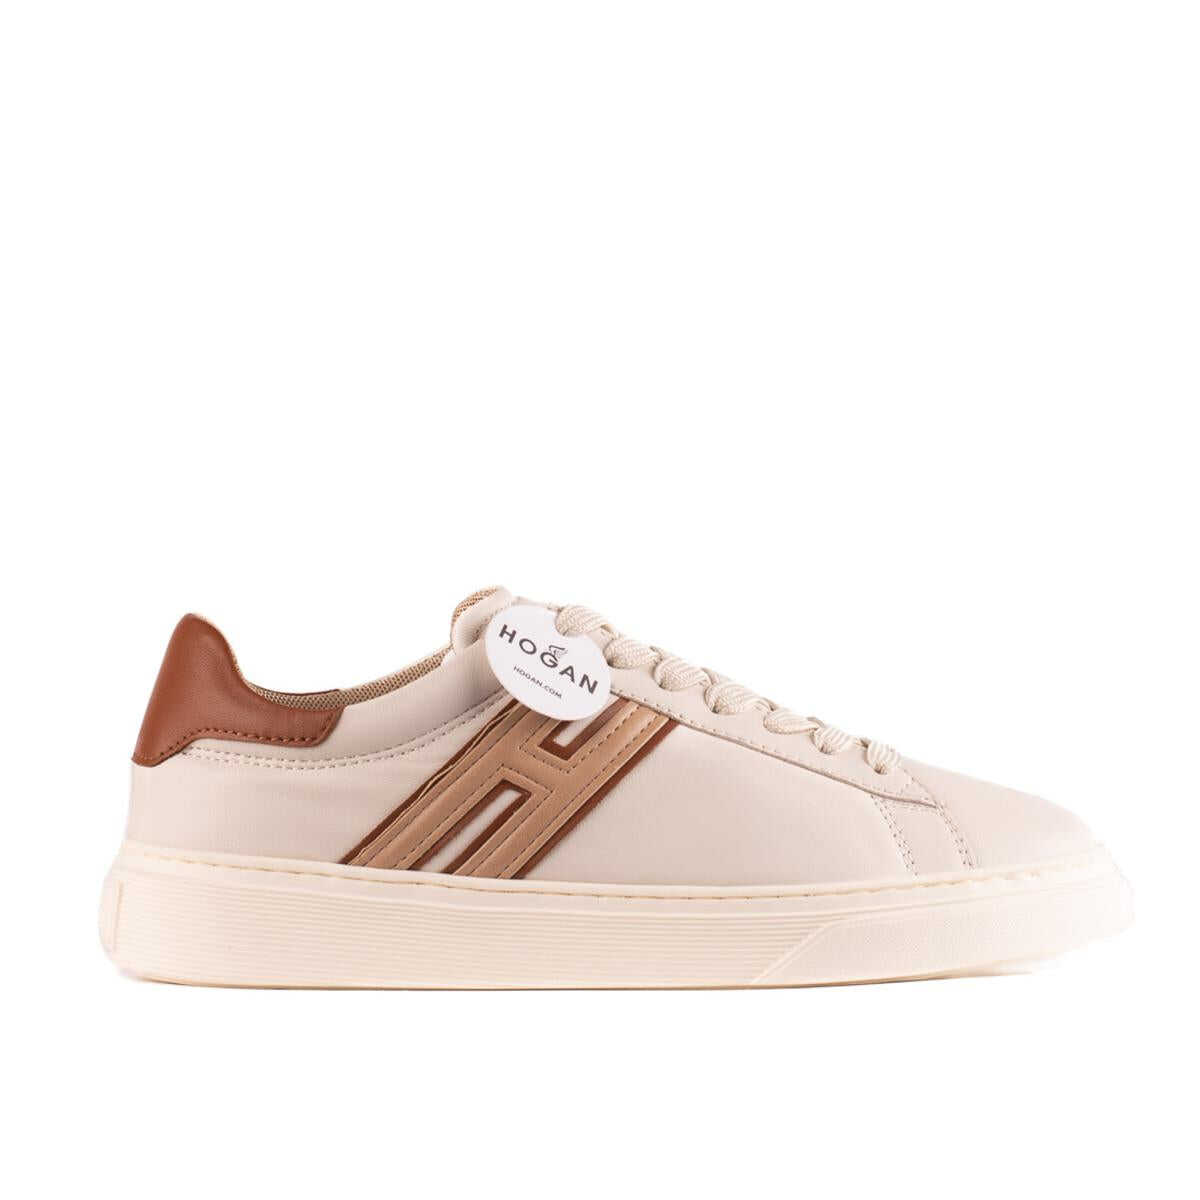 HOGAN HOGAN H365 Ivory and Brown Sneakers WHITE